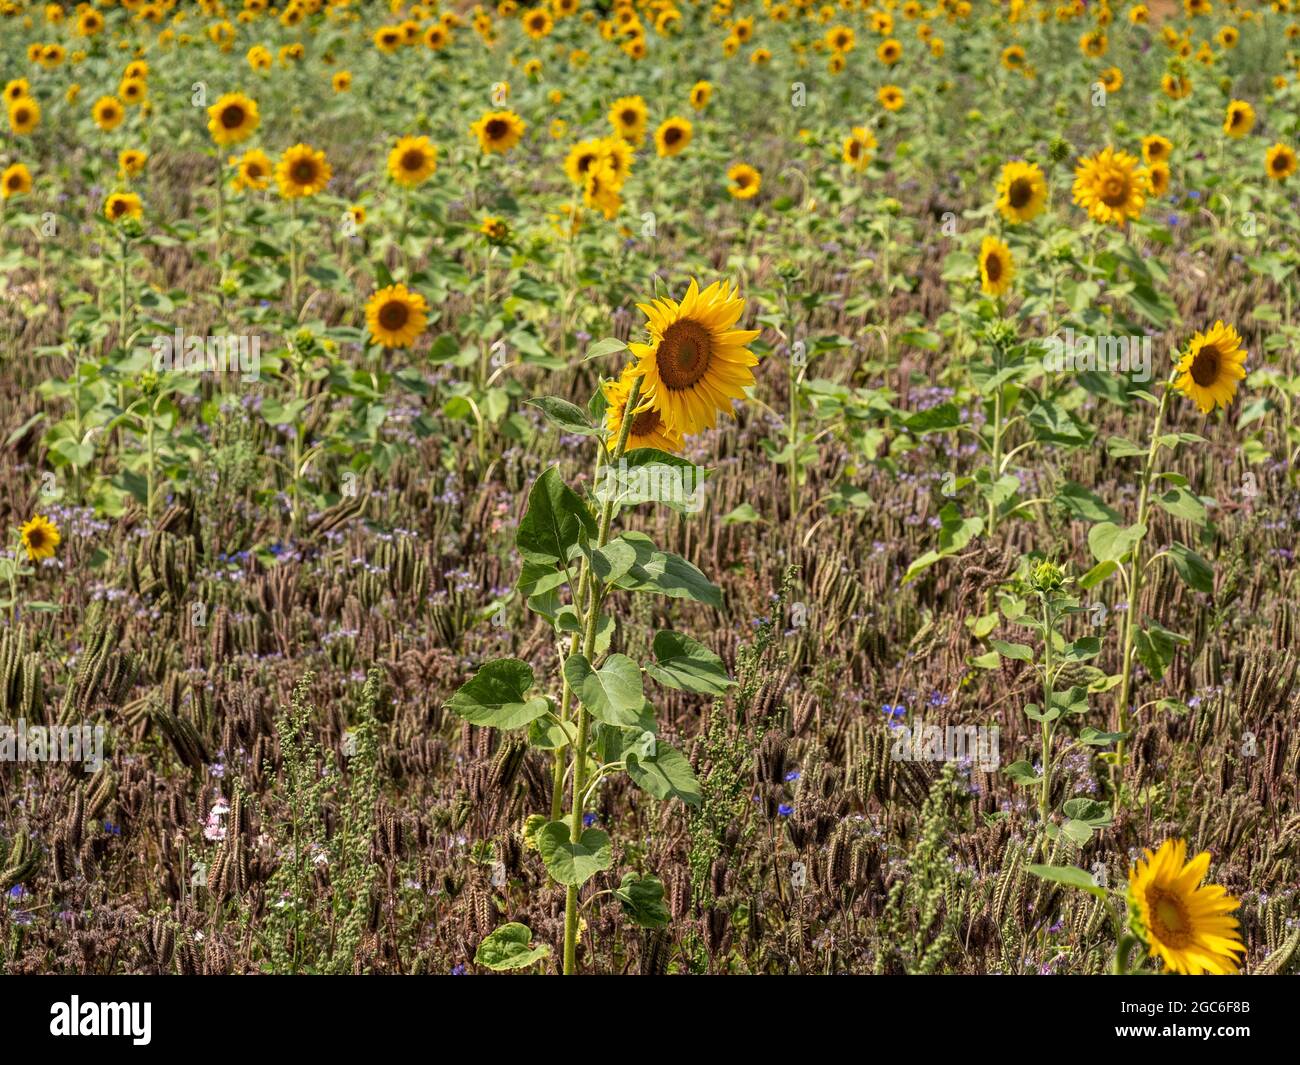 Flower field with sunflowers, blue cornflowers and other flowers Stock Photo